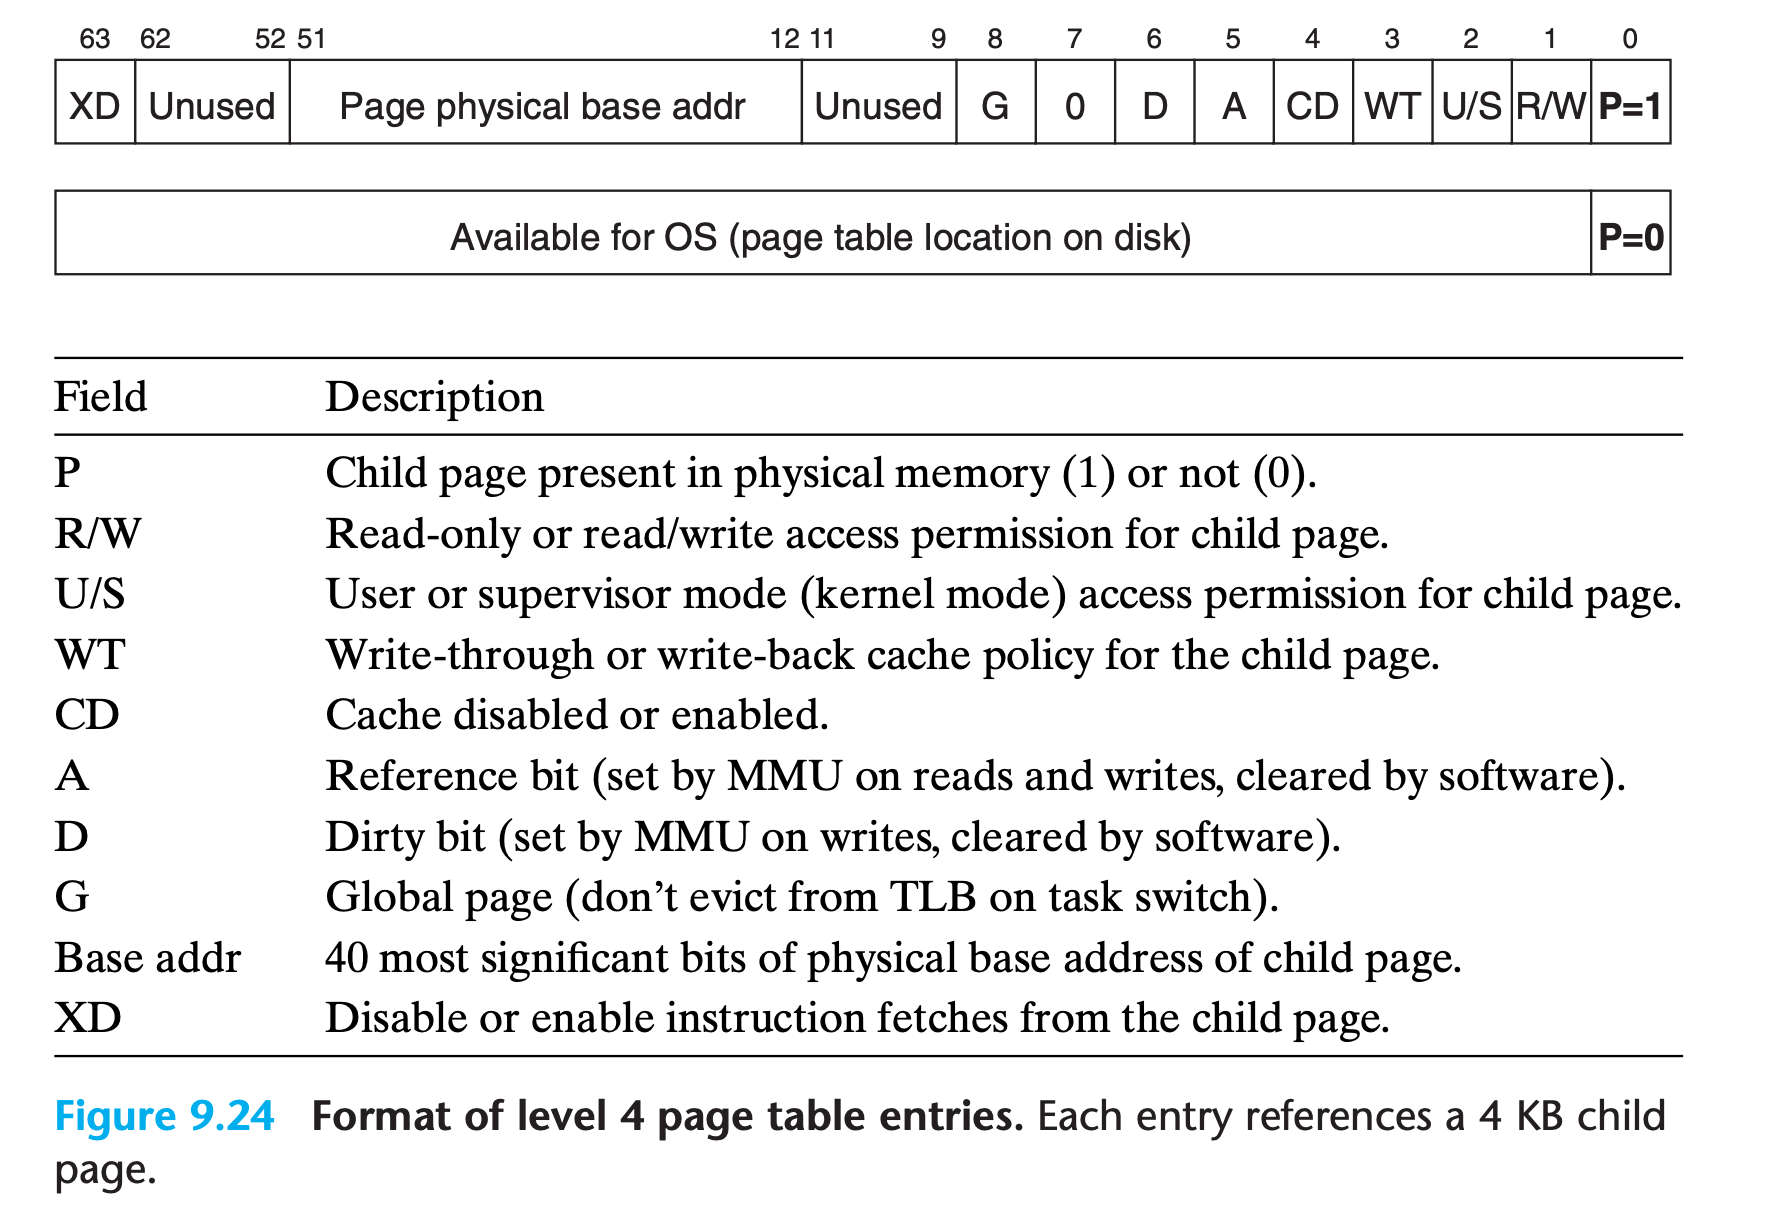 level 4 page table entry